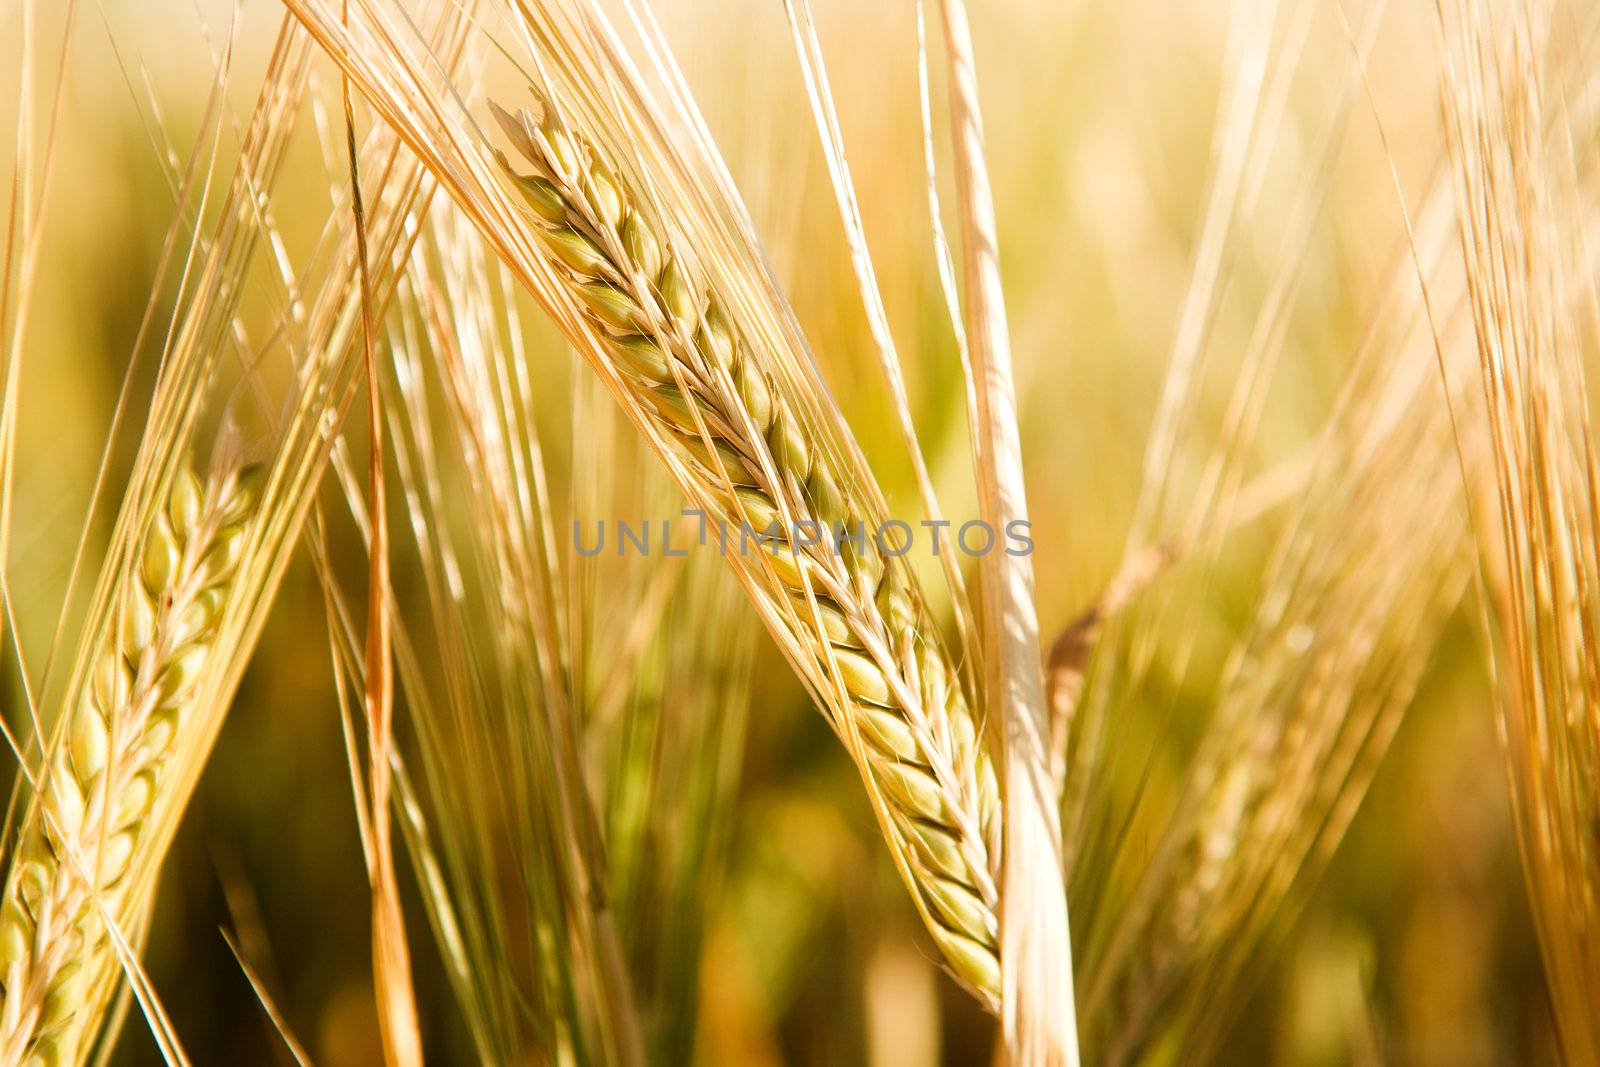 A head of wheat detail with background out of focus